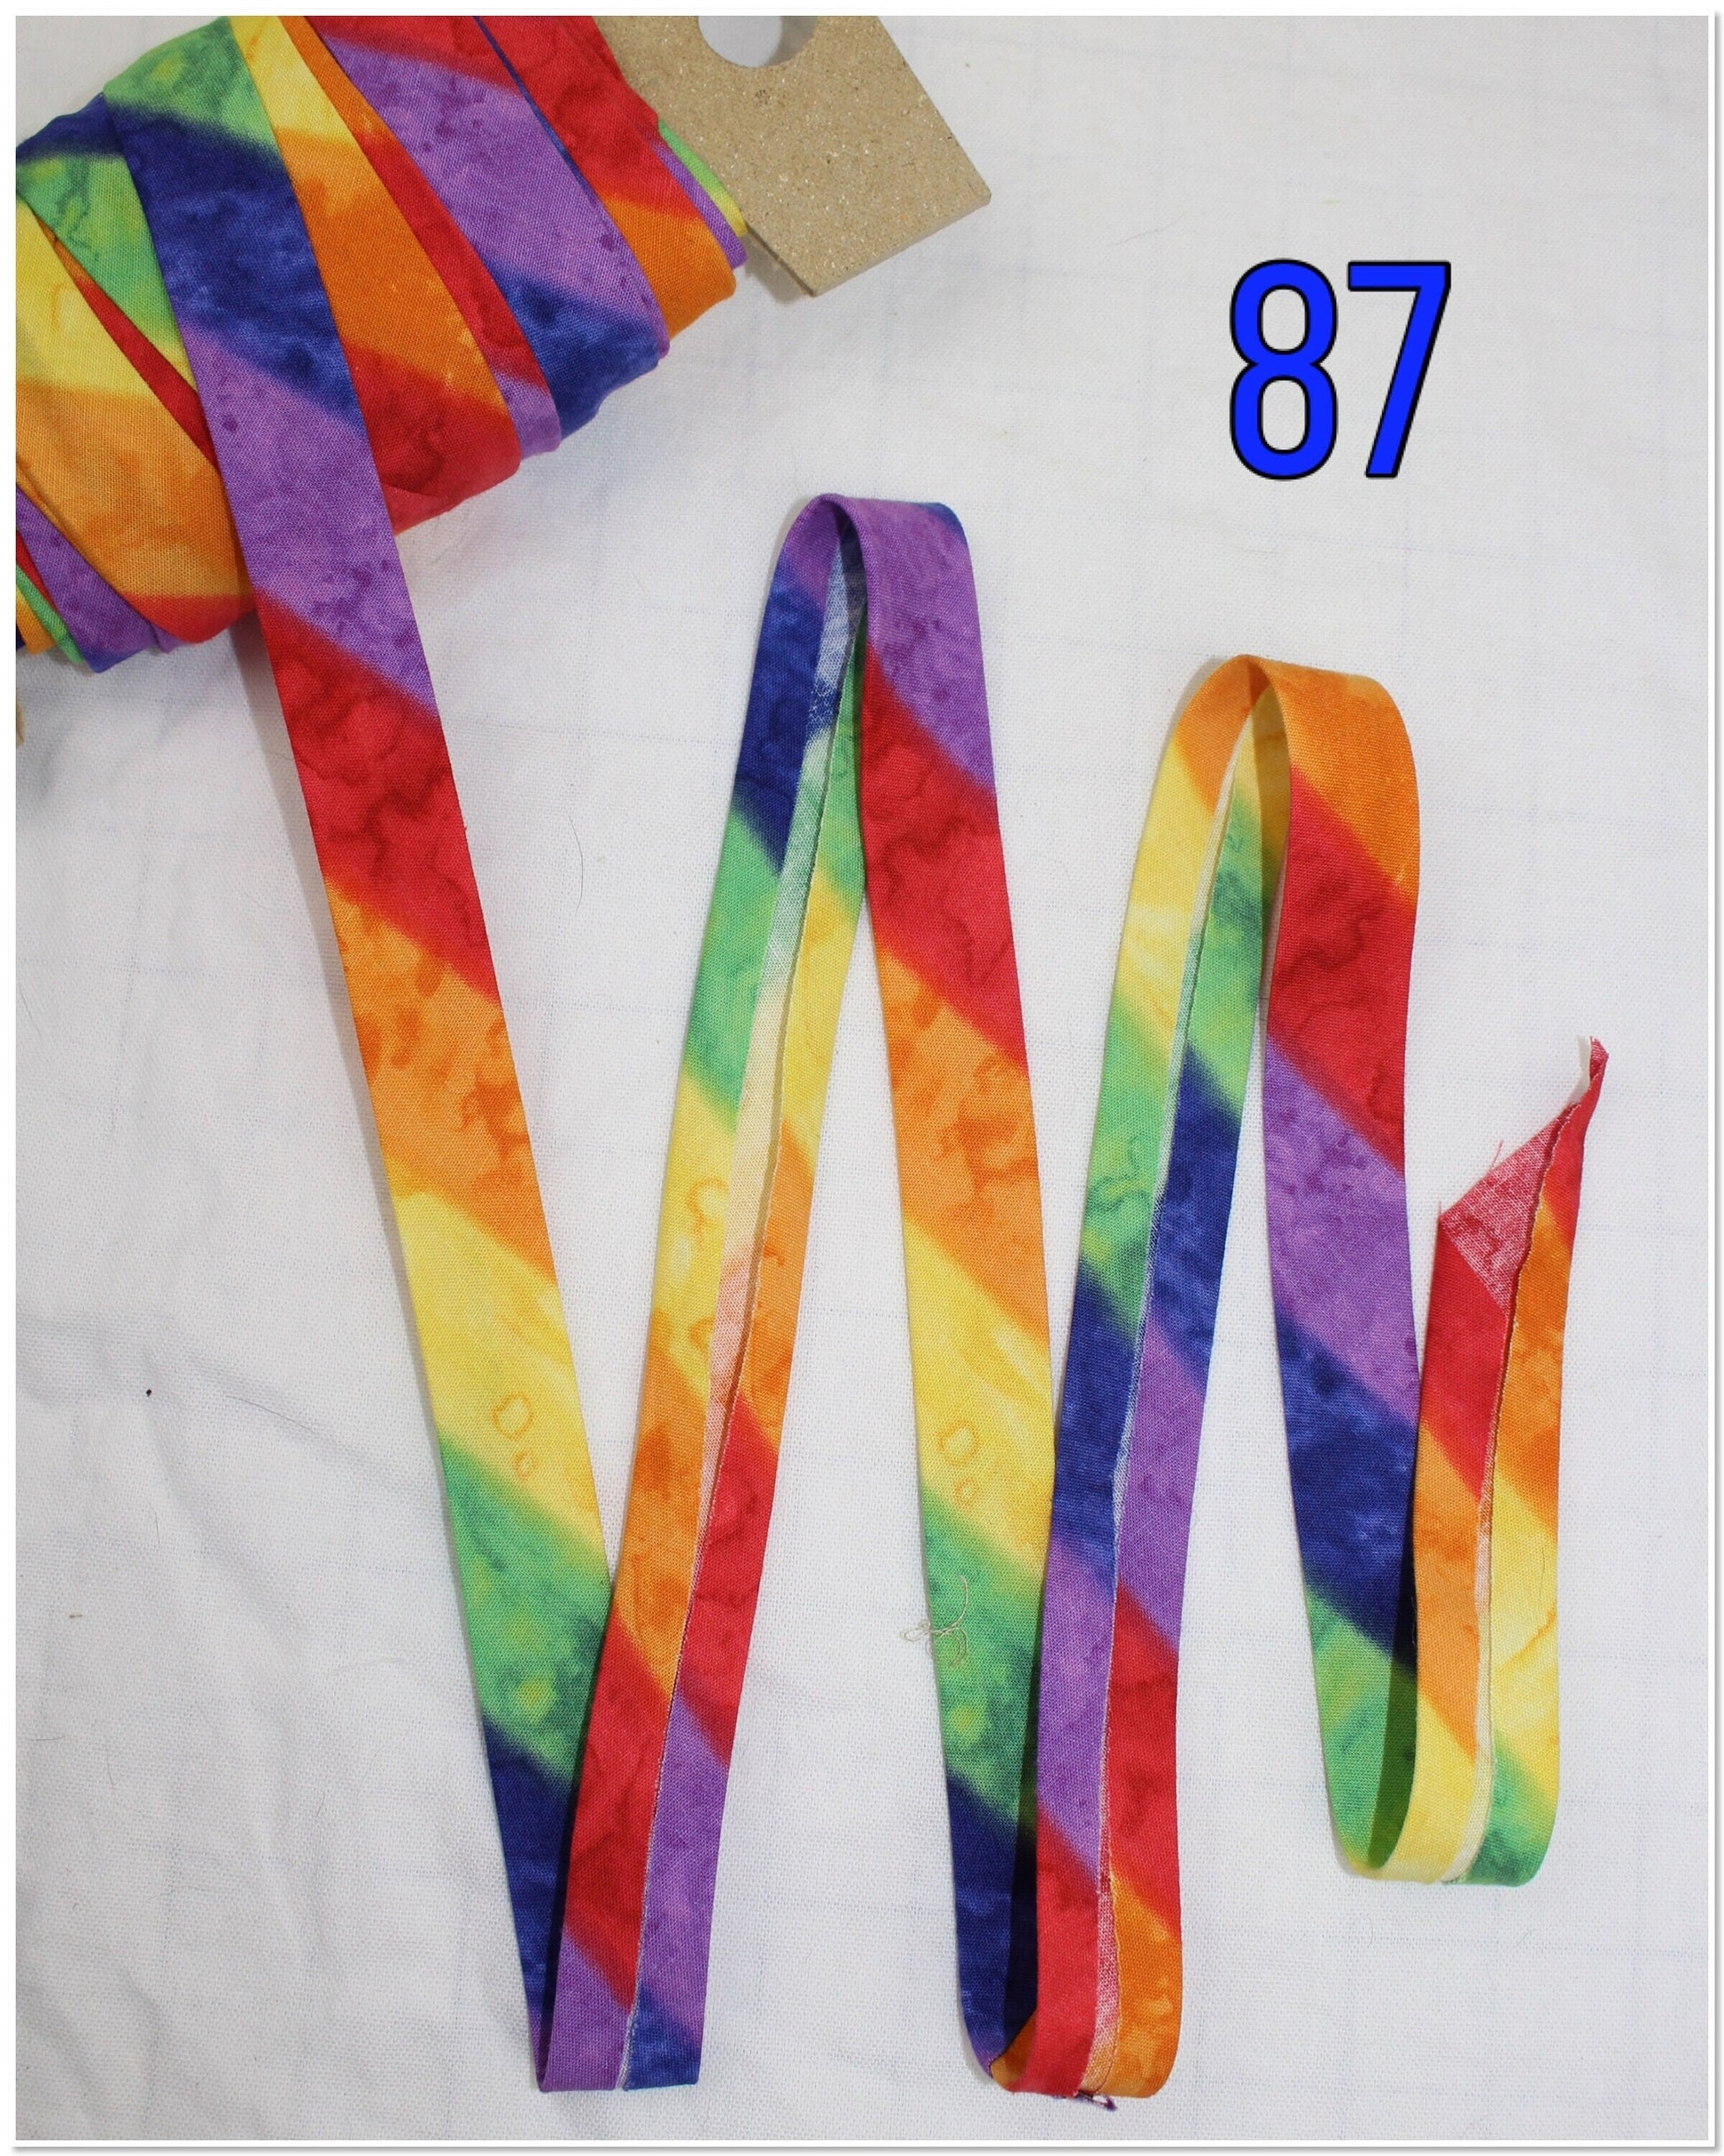 bias binding/tape/(fusible iron on available)/single fold/1 inch wide (1m)rainbow/colourful